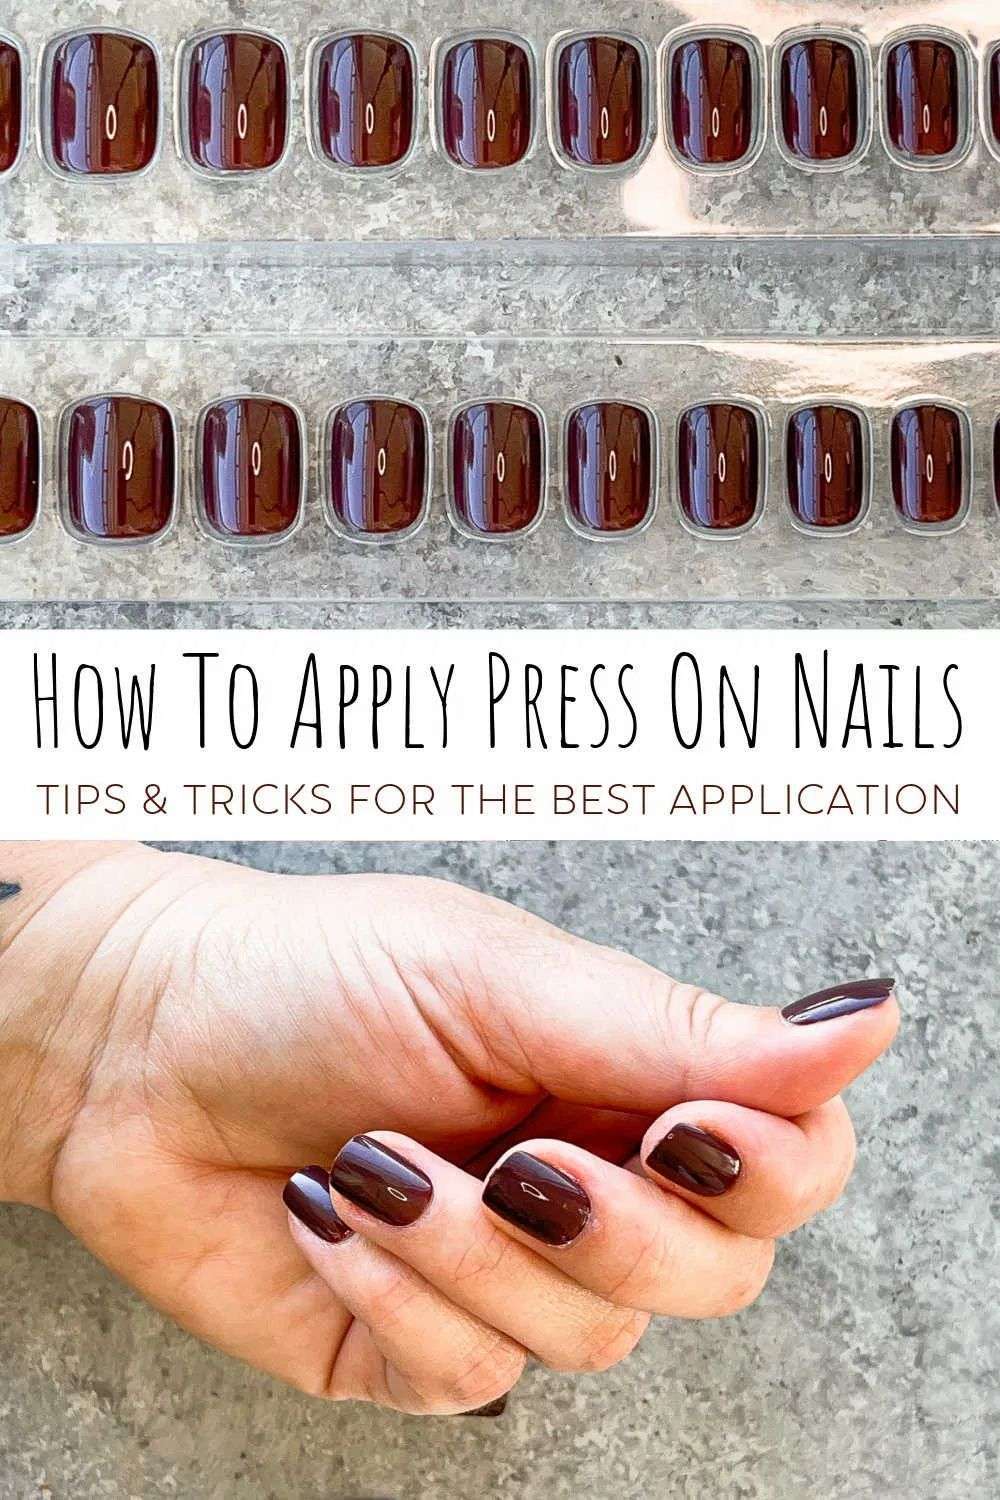 How To Apply Press On Nails in 2021